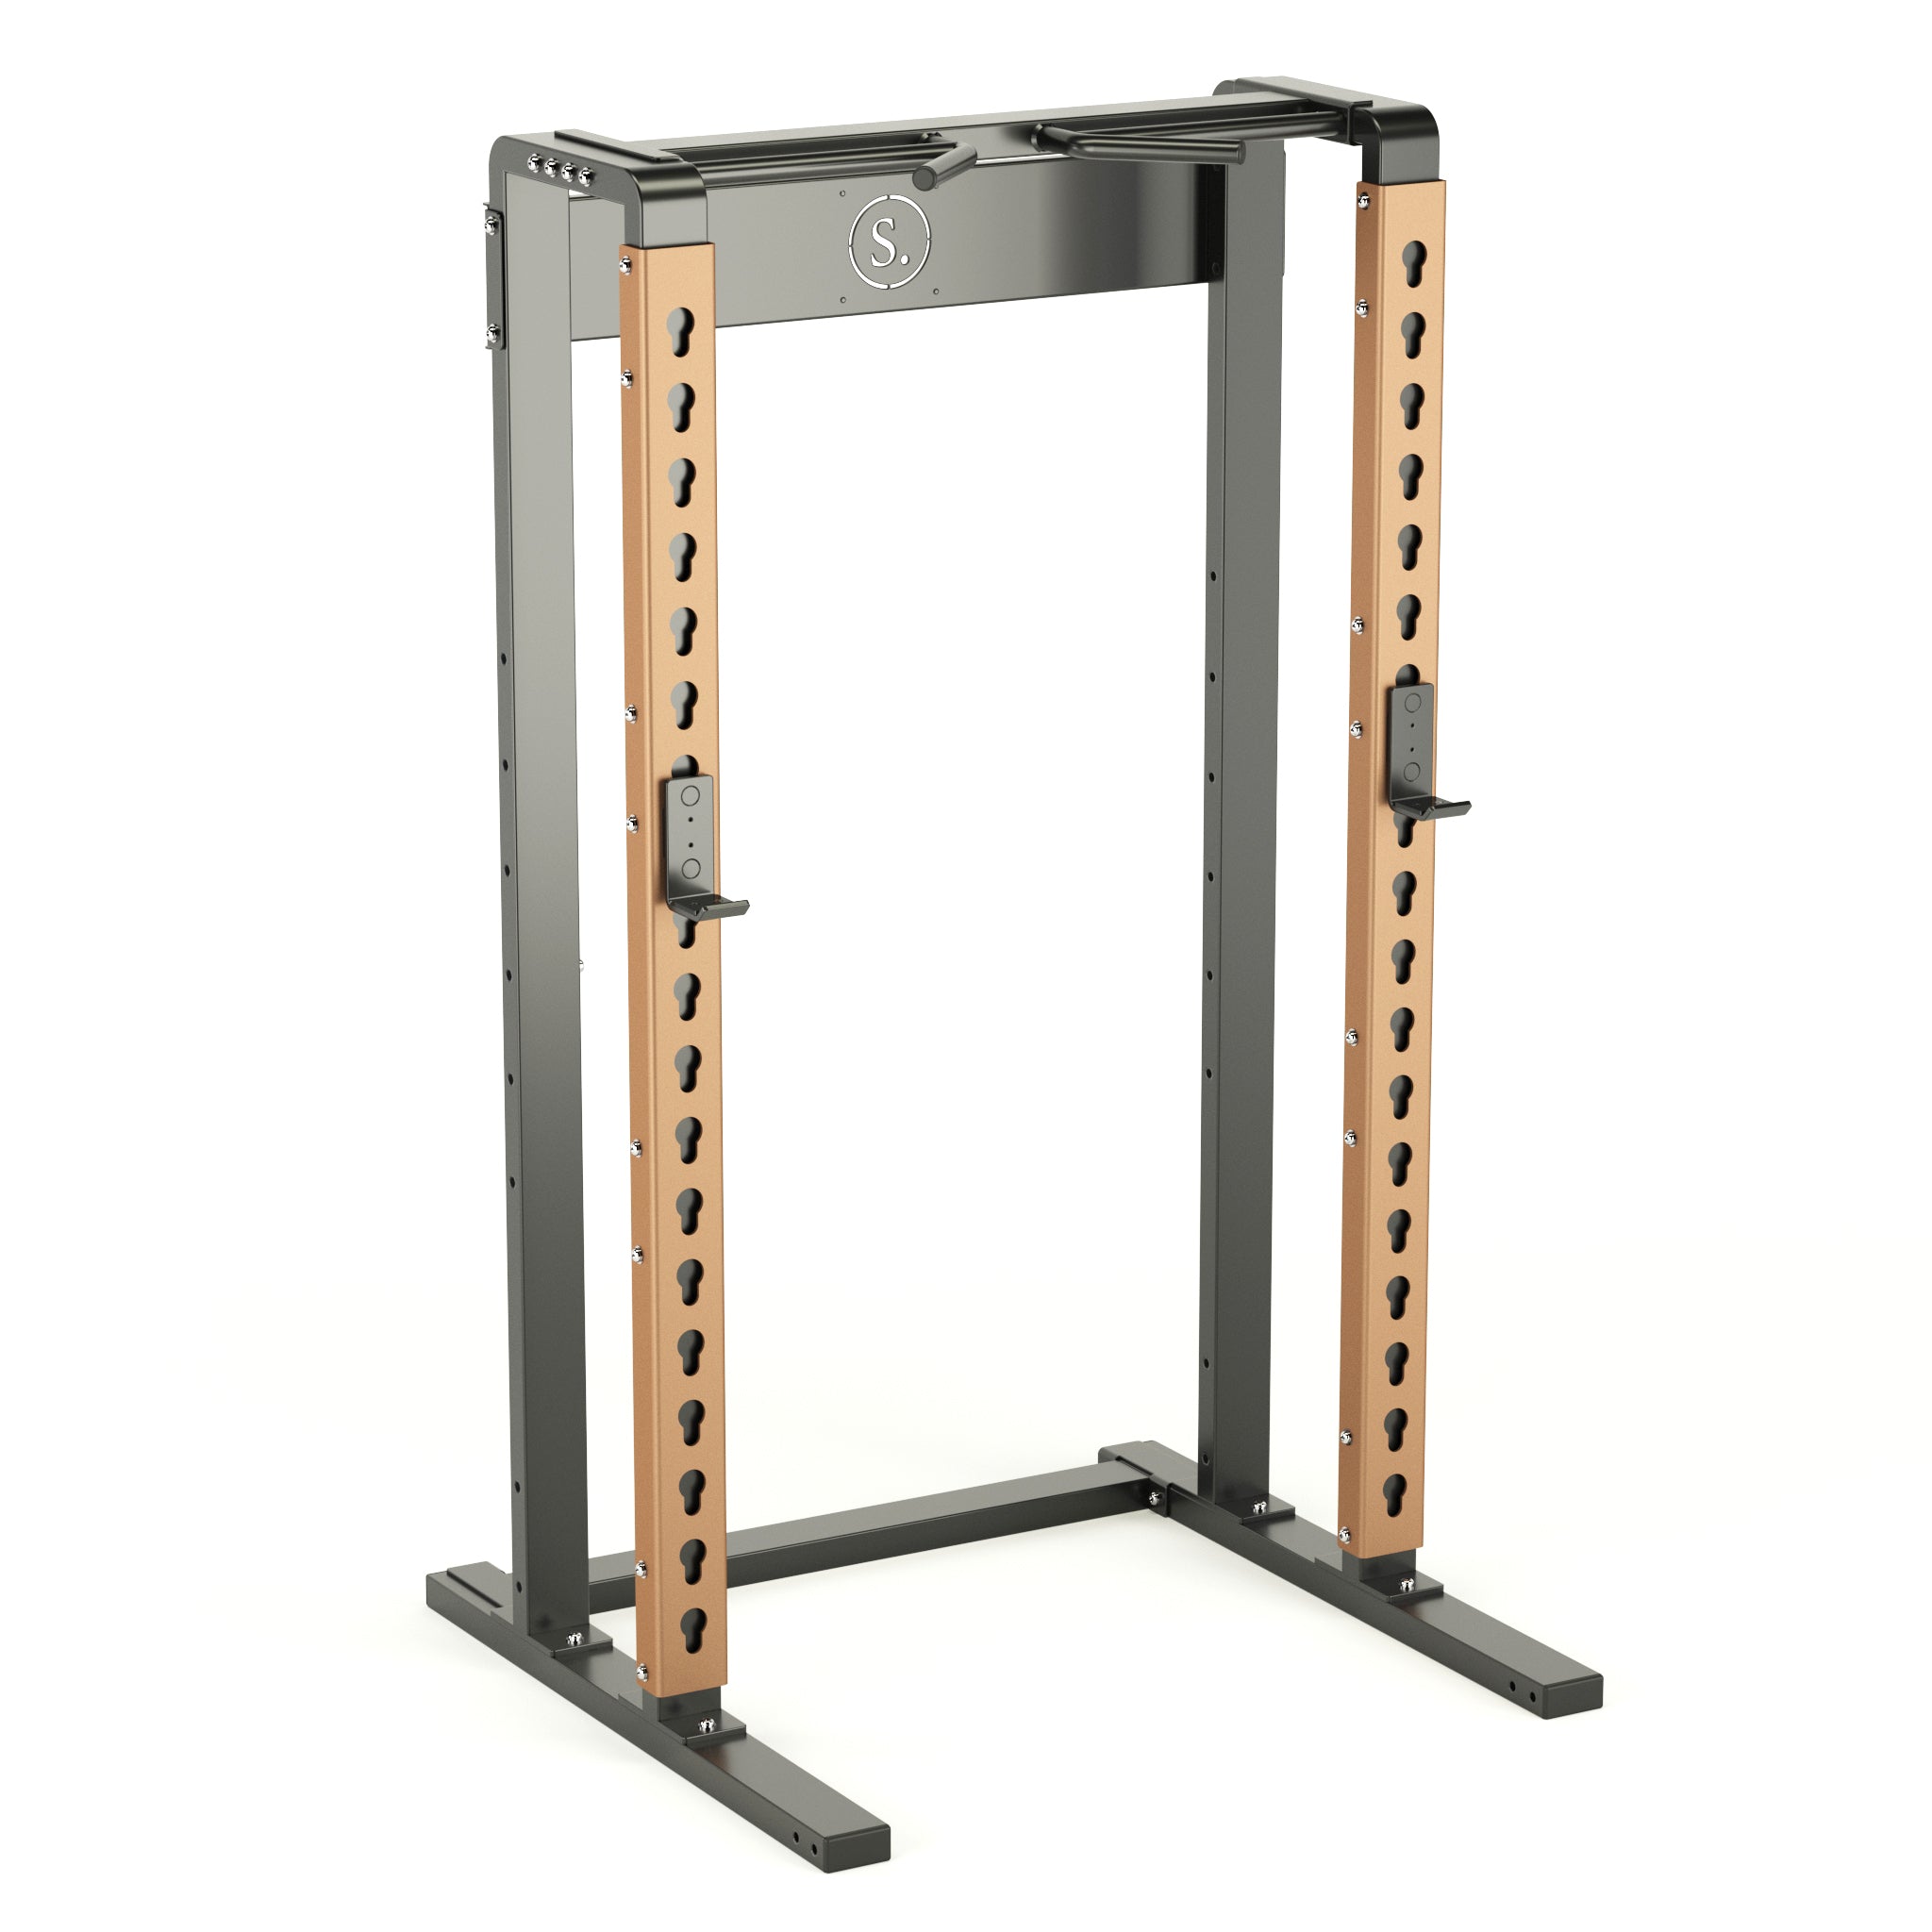 Solo Squat Rack in bronze with multi-grip pull-up